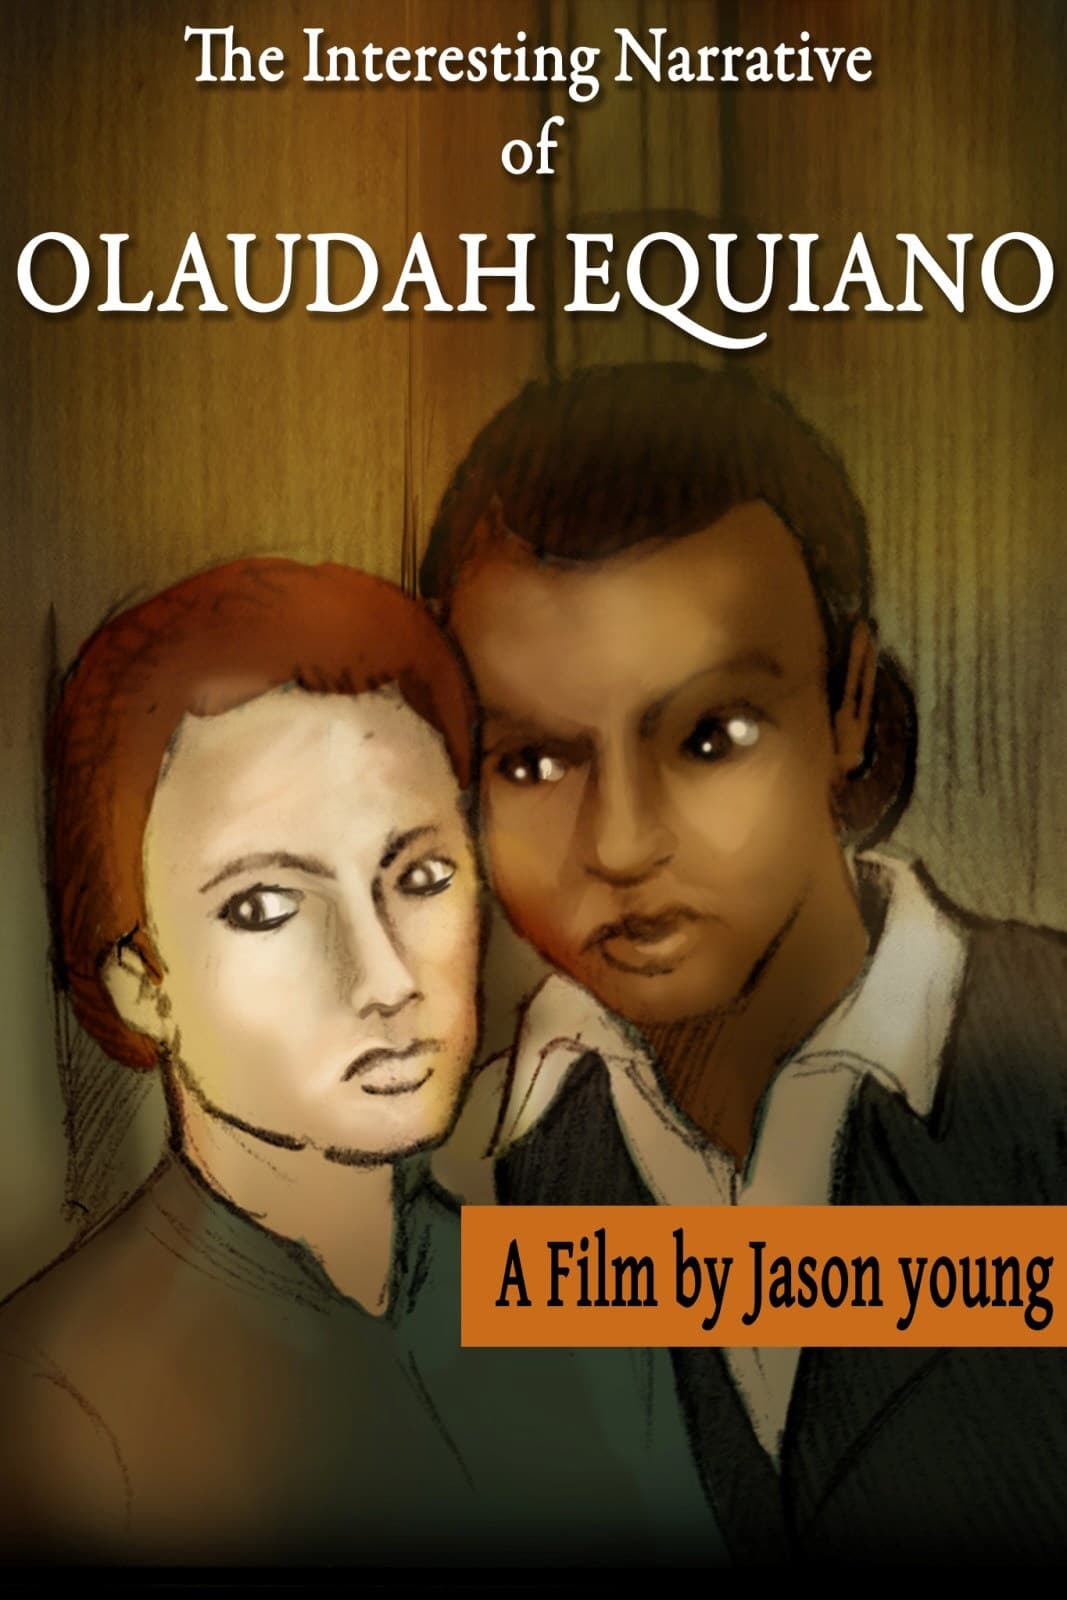 Equiano in Africa